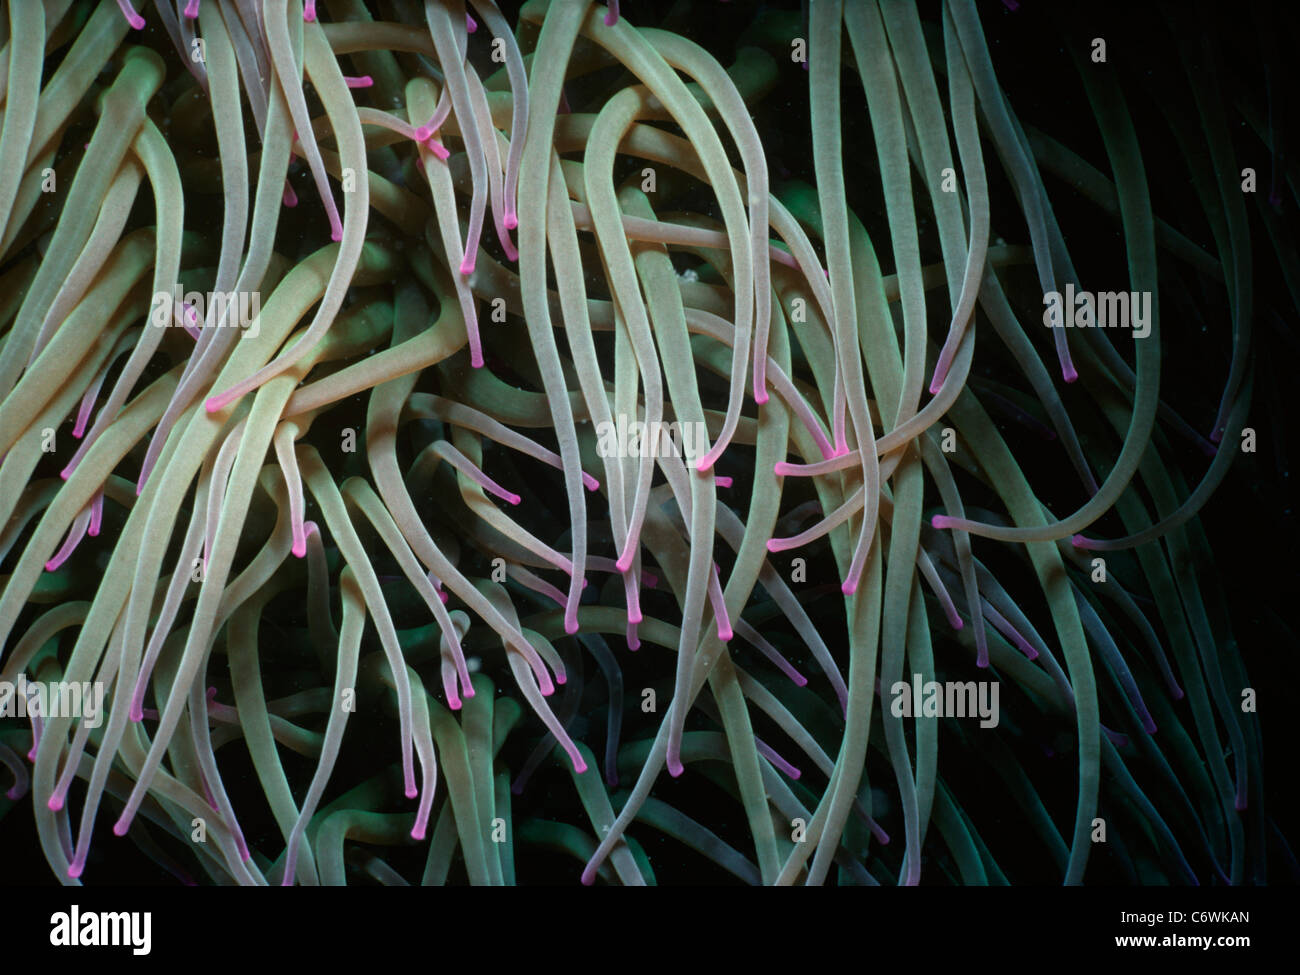 Tentacles of the Magnificent Sea Anemone (Heteractis magnifica). Brittany, France - Atlantic Ocean Stock Photo